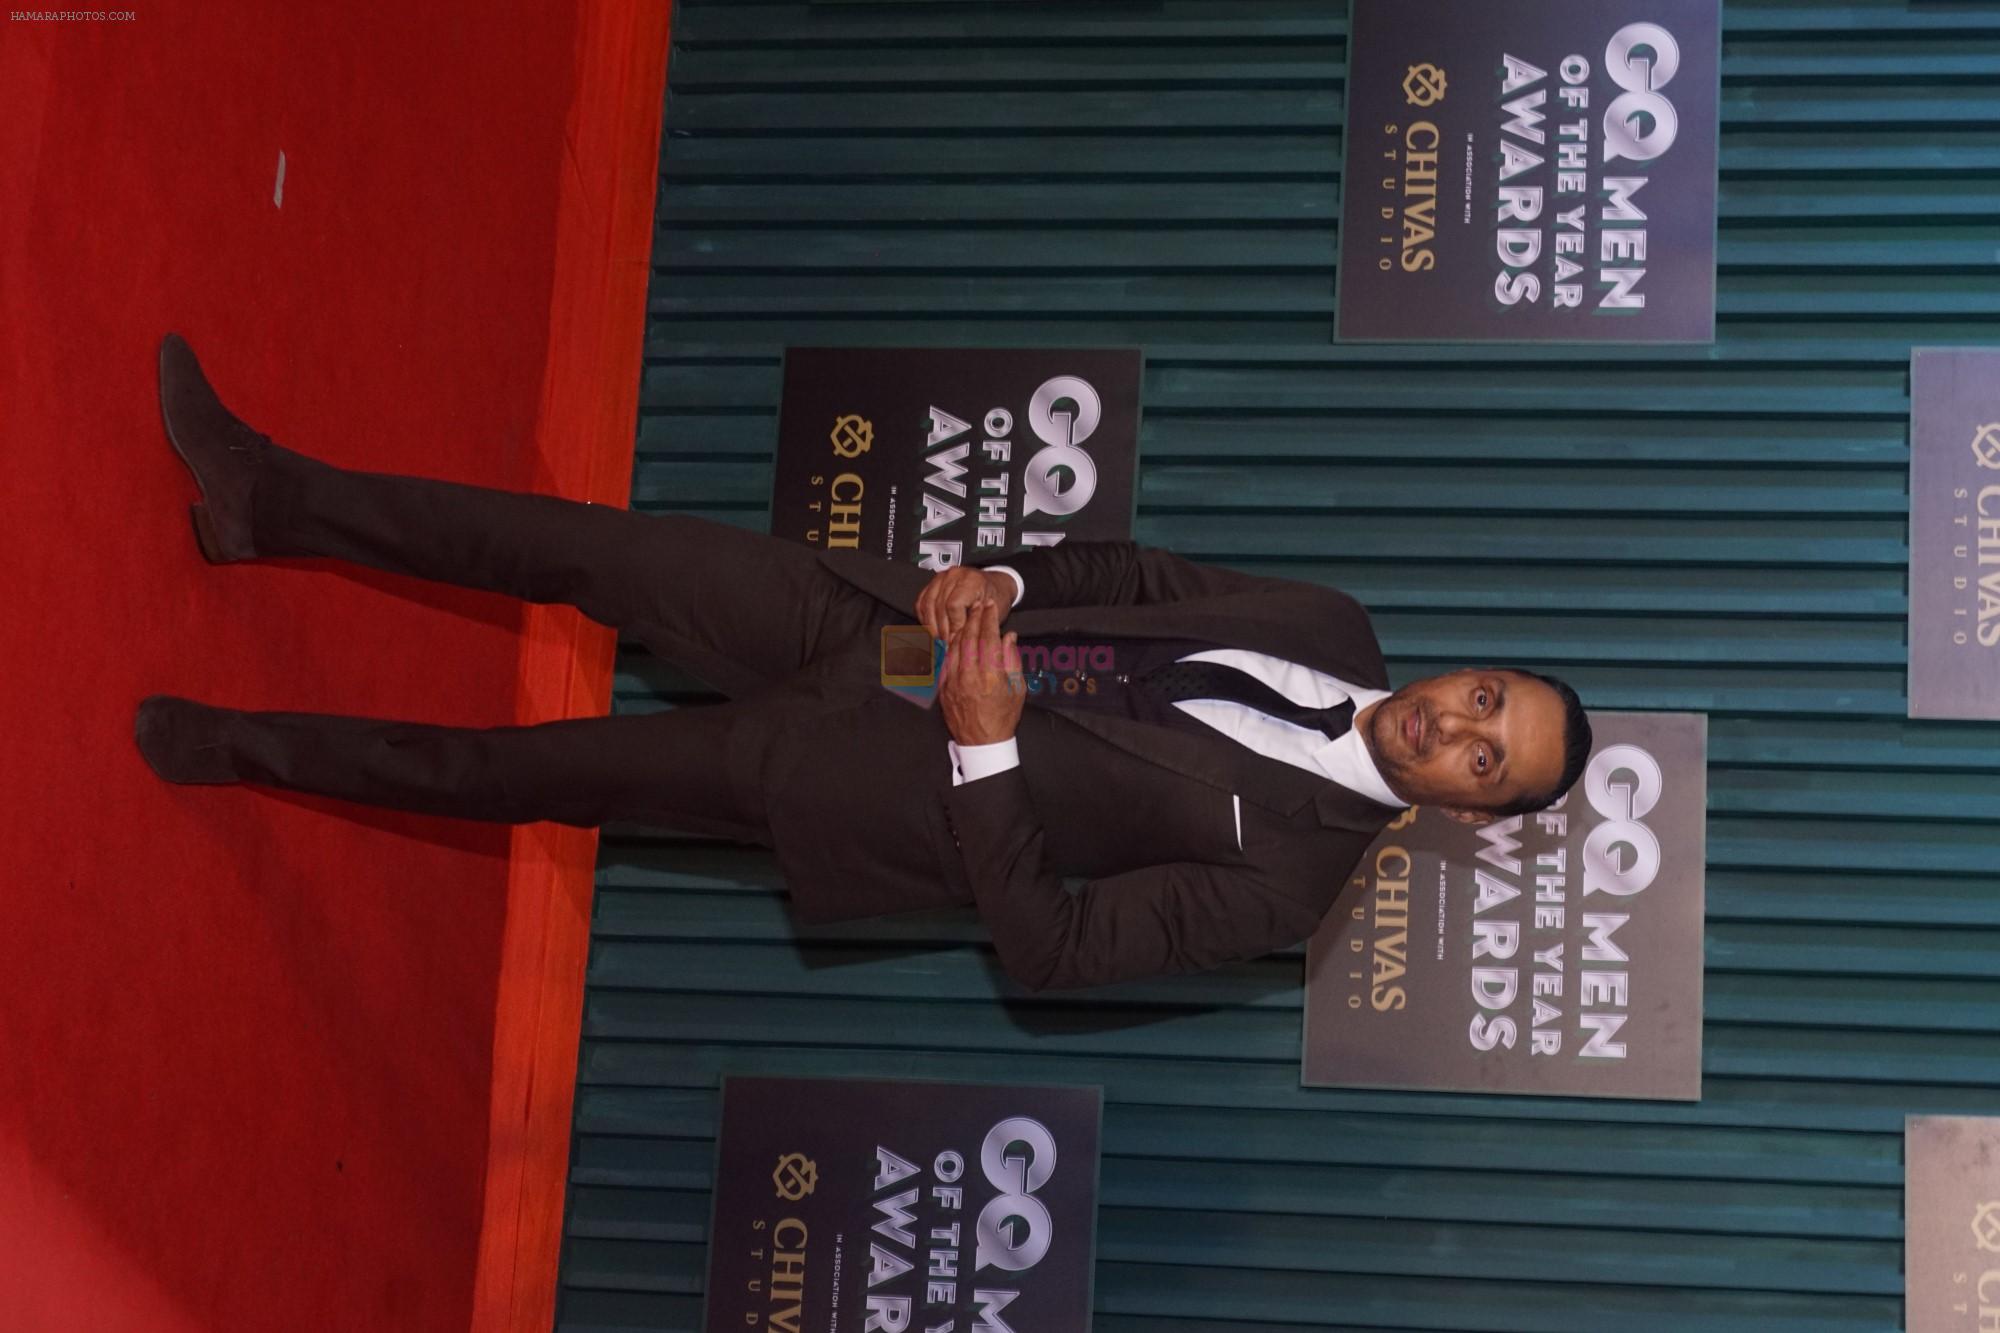 Rahul Bose at GQ Men of the Year Awards 2018 on 27th Sept 2018